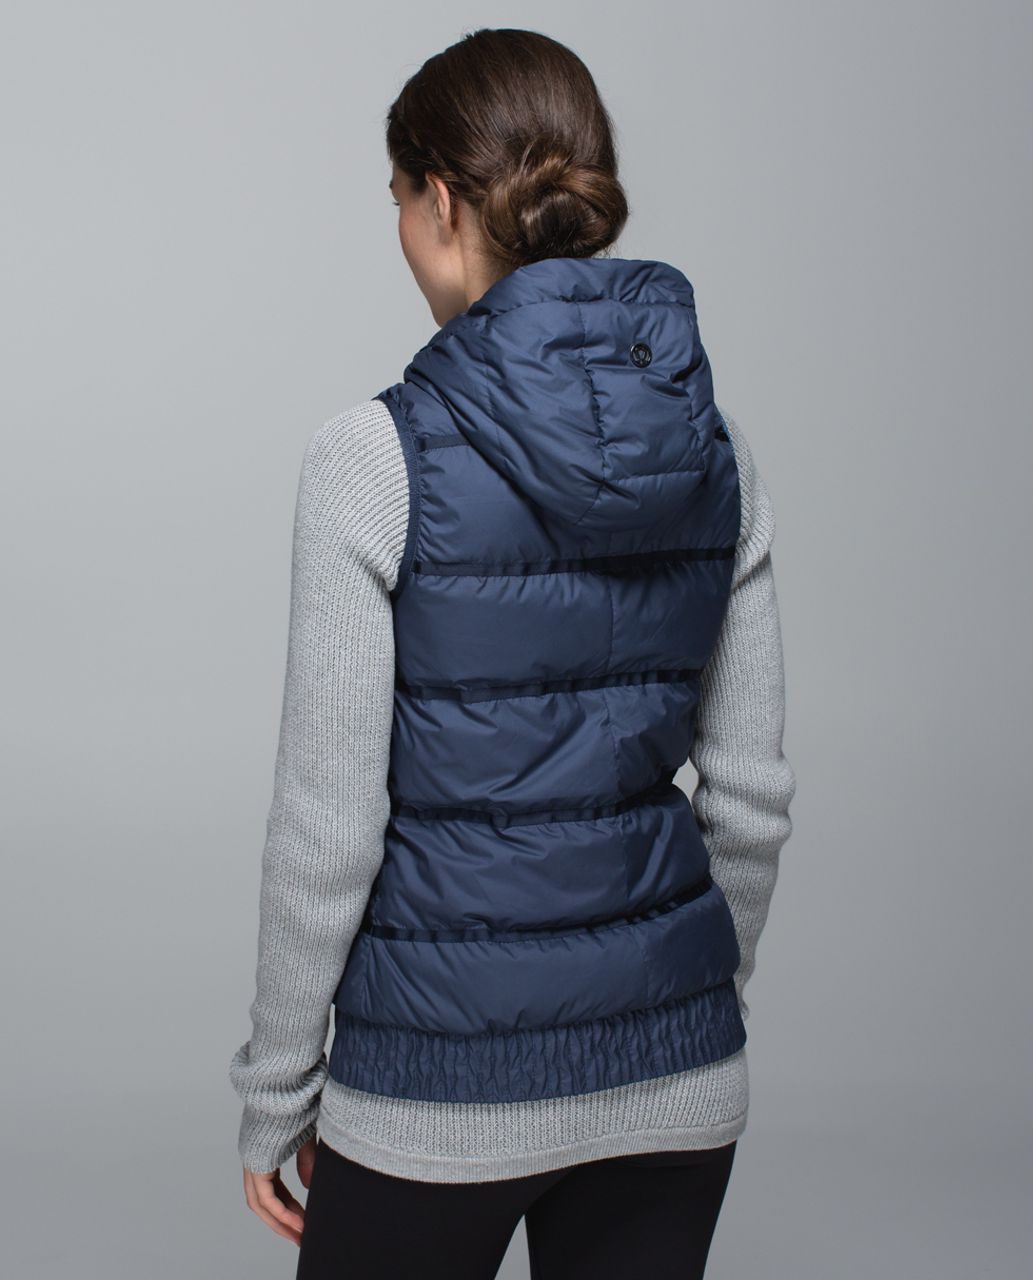 Lululemon Chilly Chill Puffy Vest - Inkwell / Exploded Sashico Star Inkwell Ghost